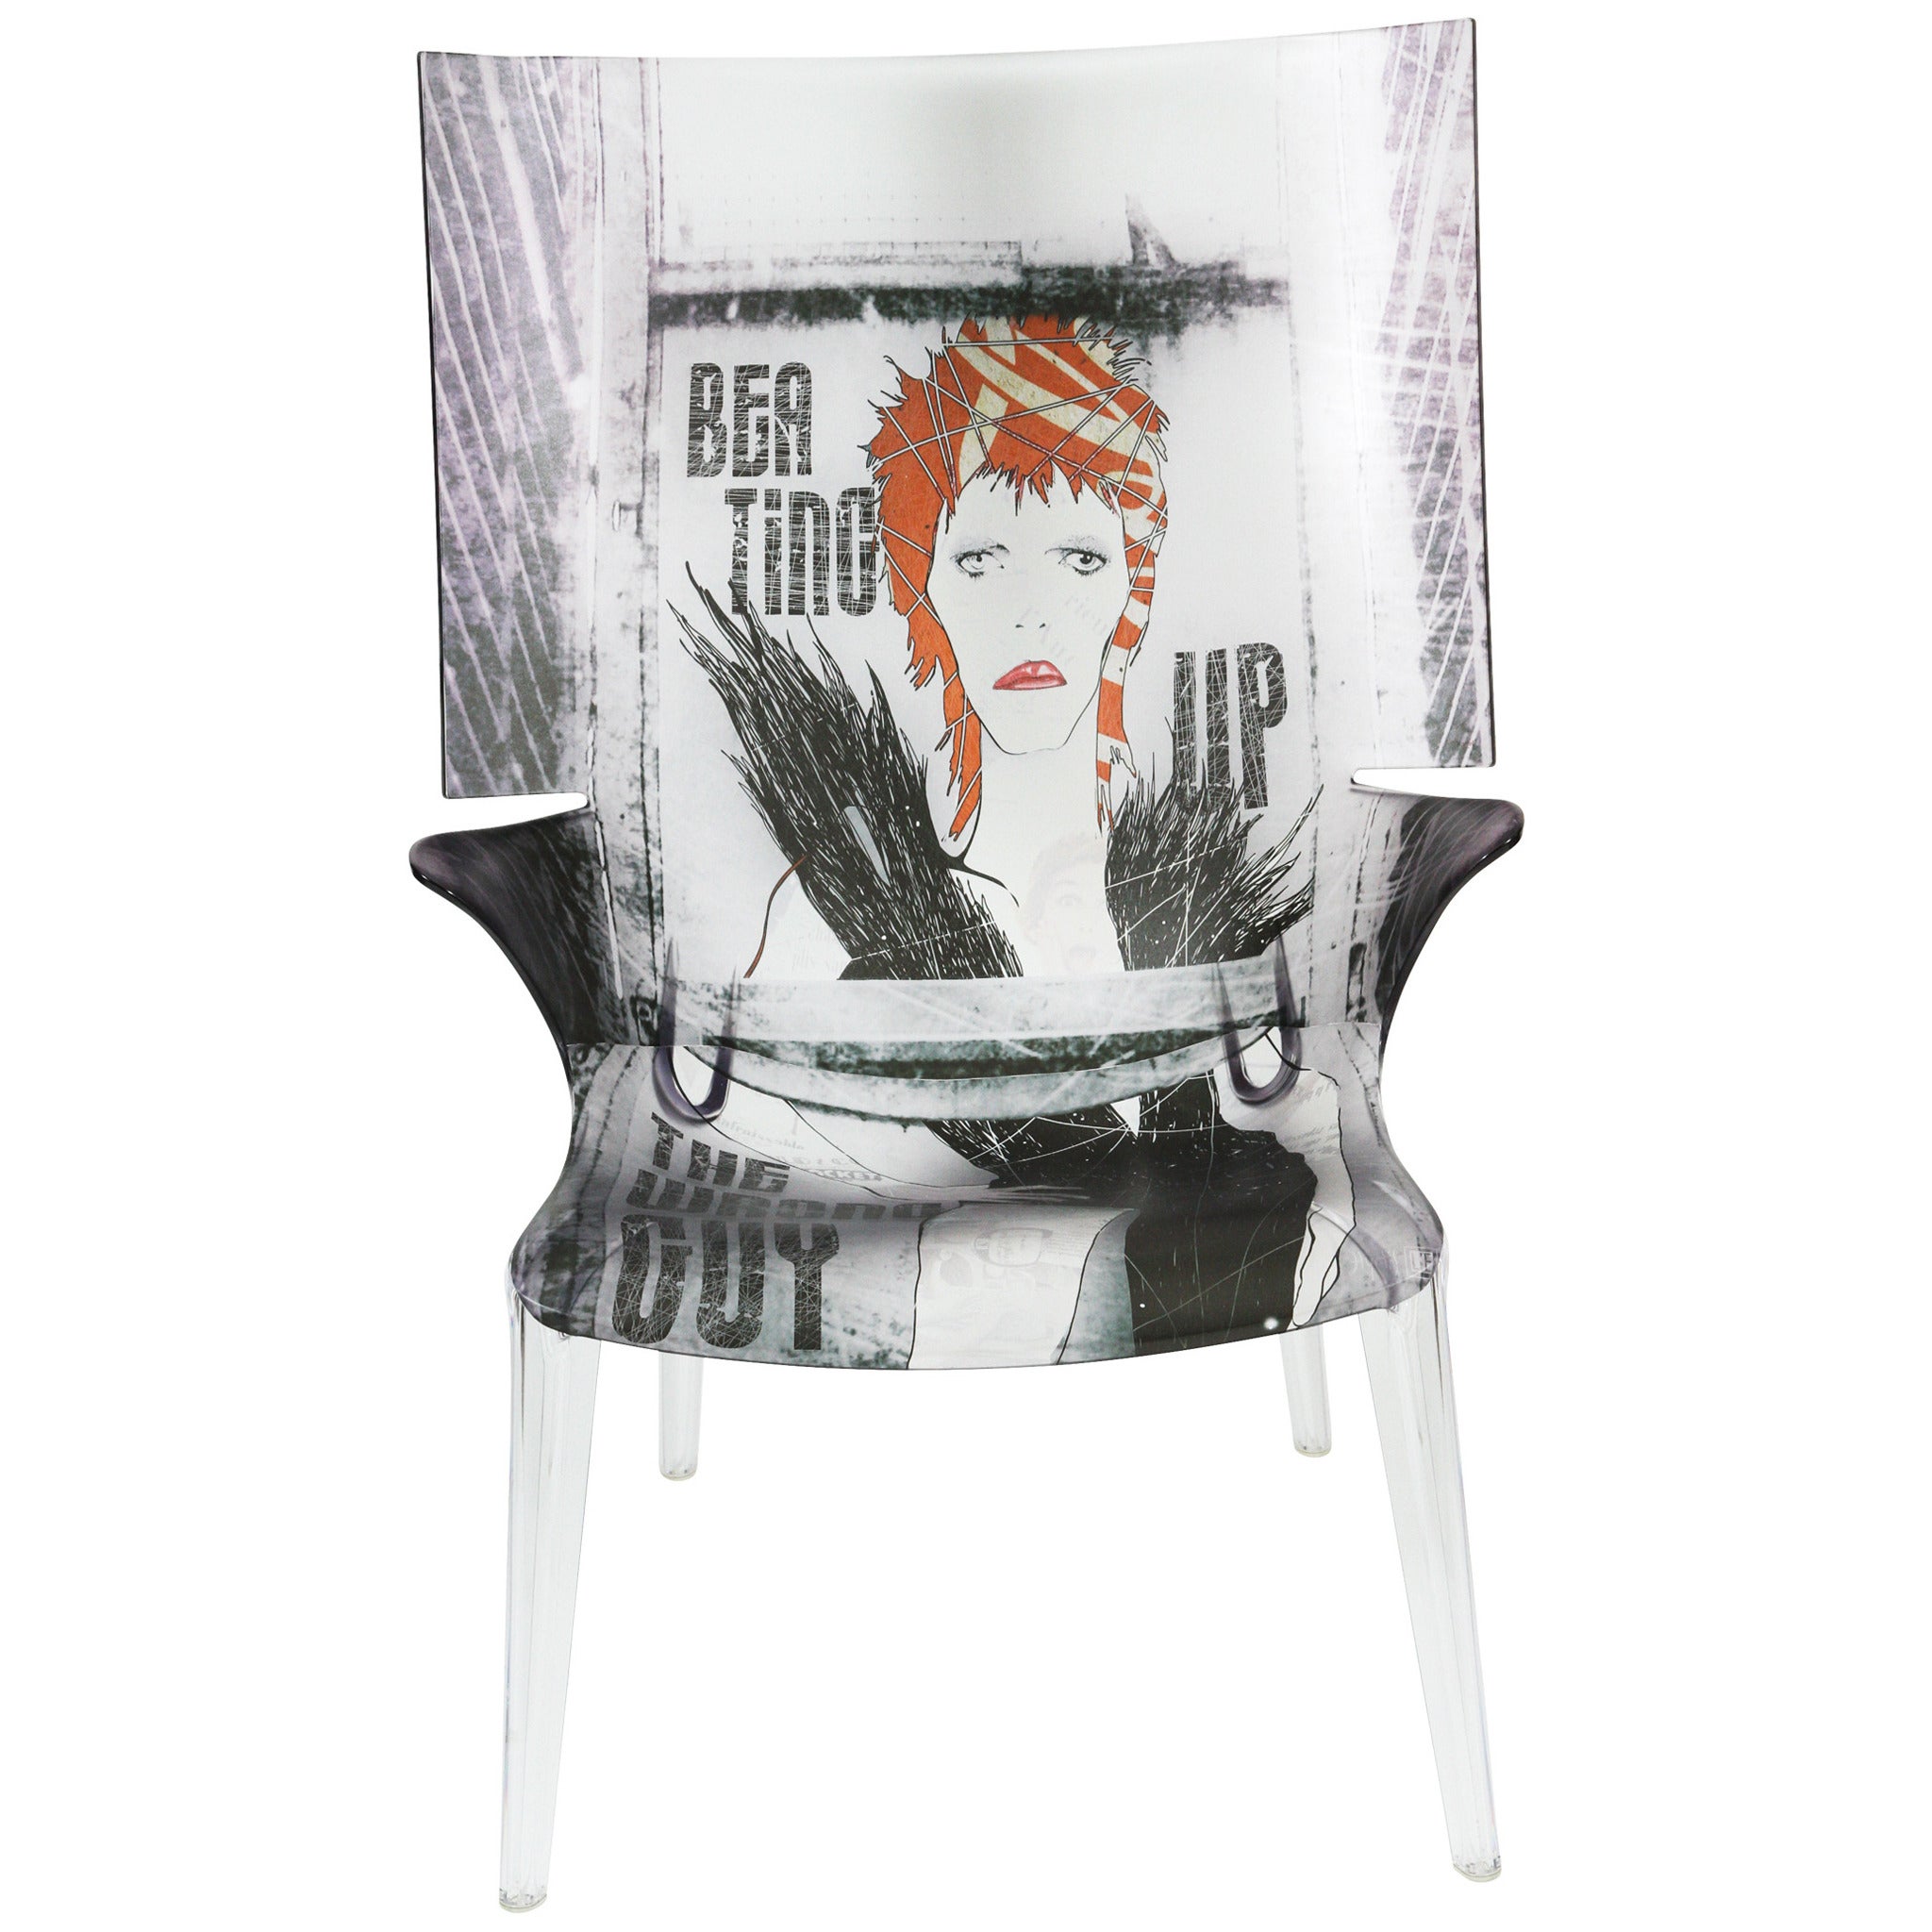 David Bowie "Wrong Guy" Transparent Polycarbonate Uncle Jim Ghost Chair For Sale